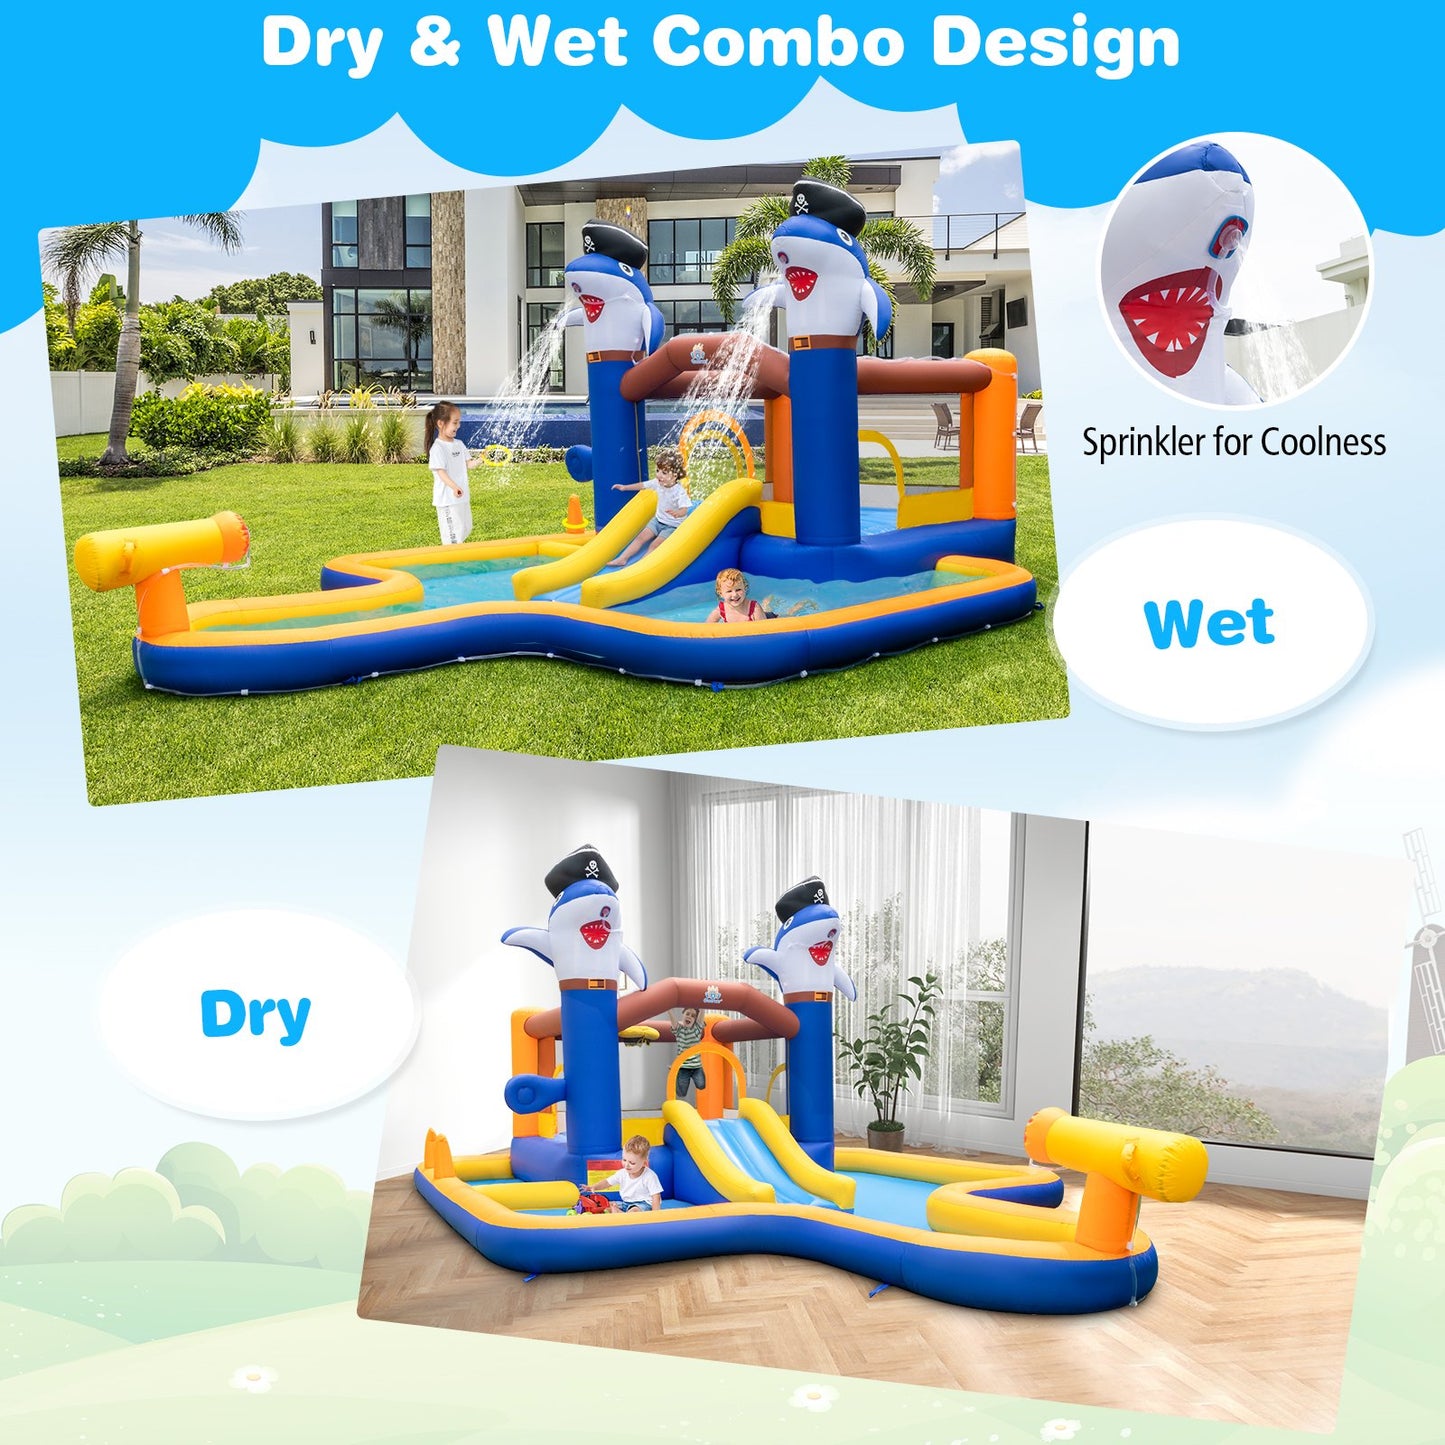 7-In-1 Water Slide Park with Splash Pool and Water Cannon with 750W Blower